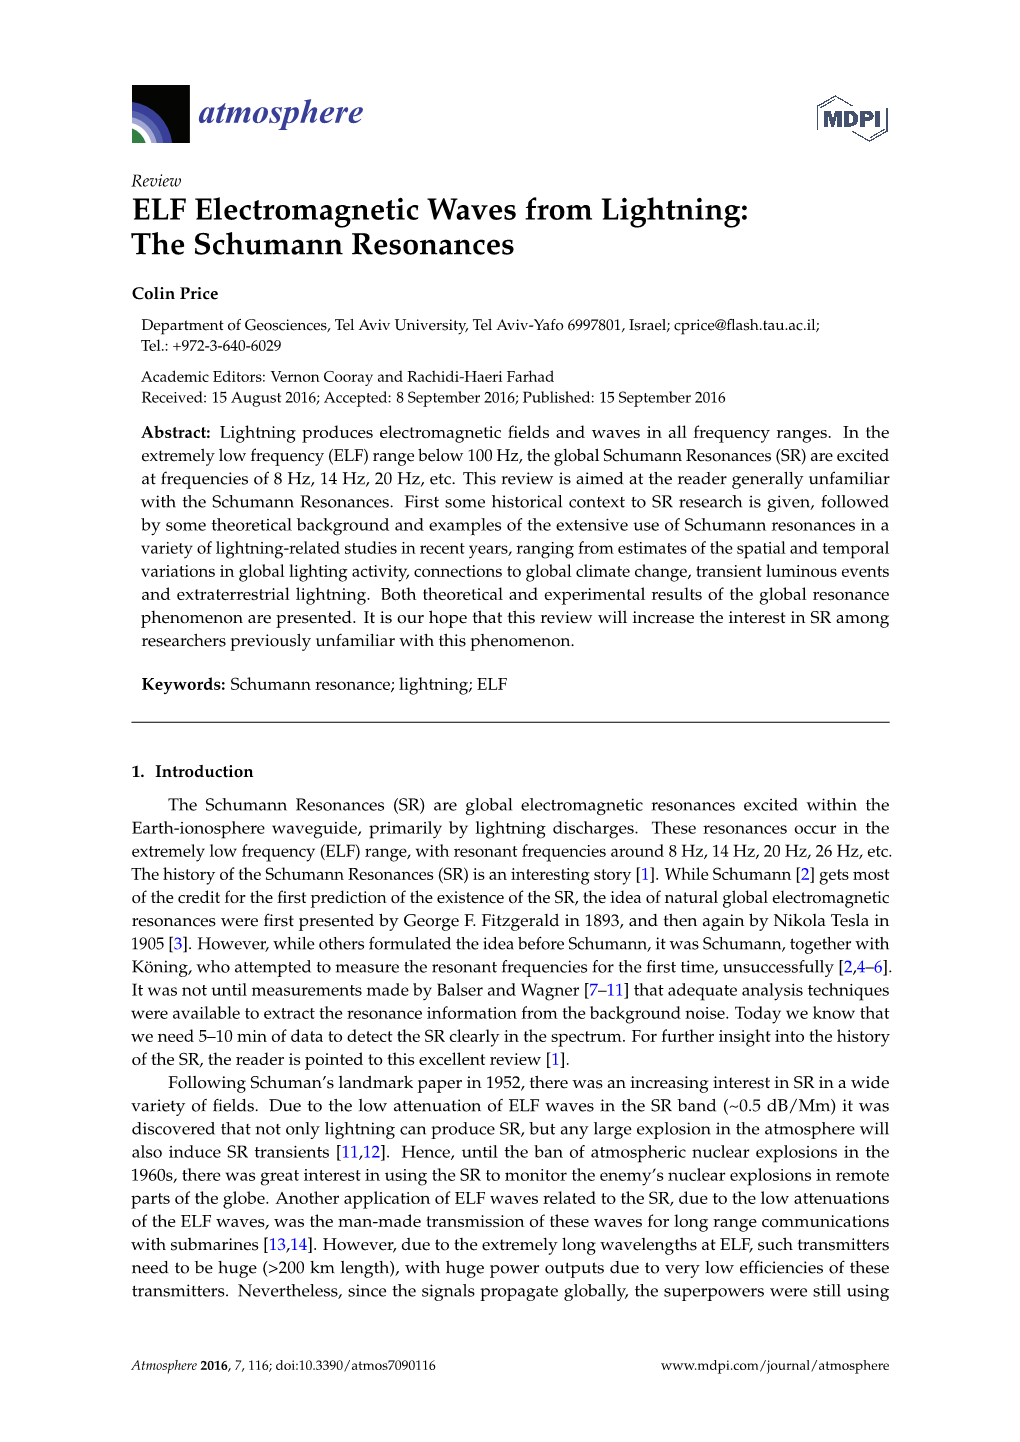 ELF Electromagnetic Waves from Lightning: the Schumann Resonances